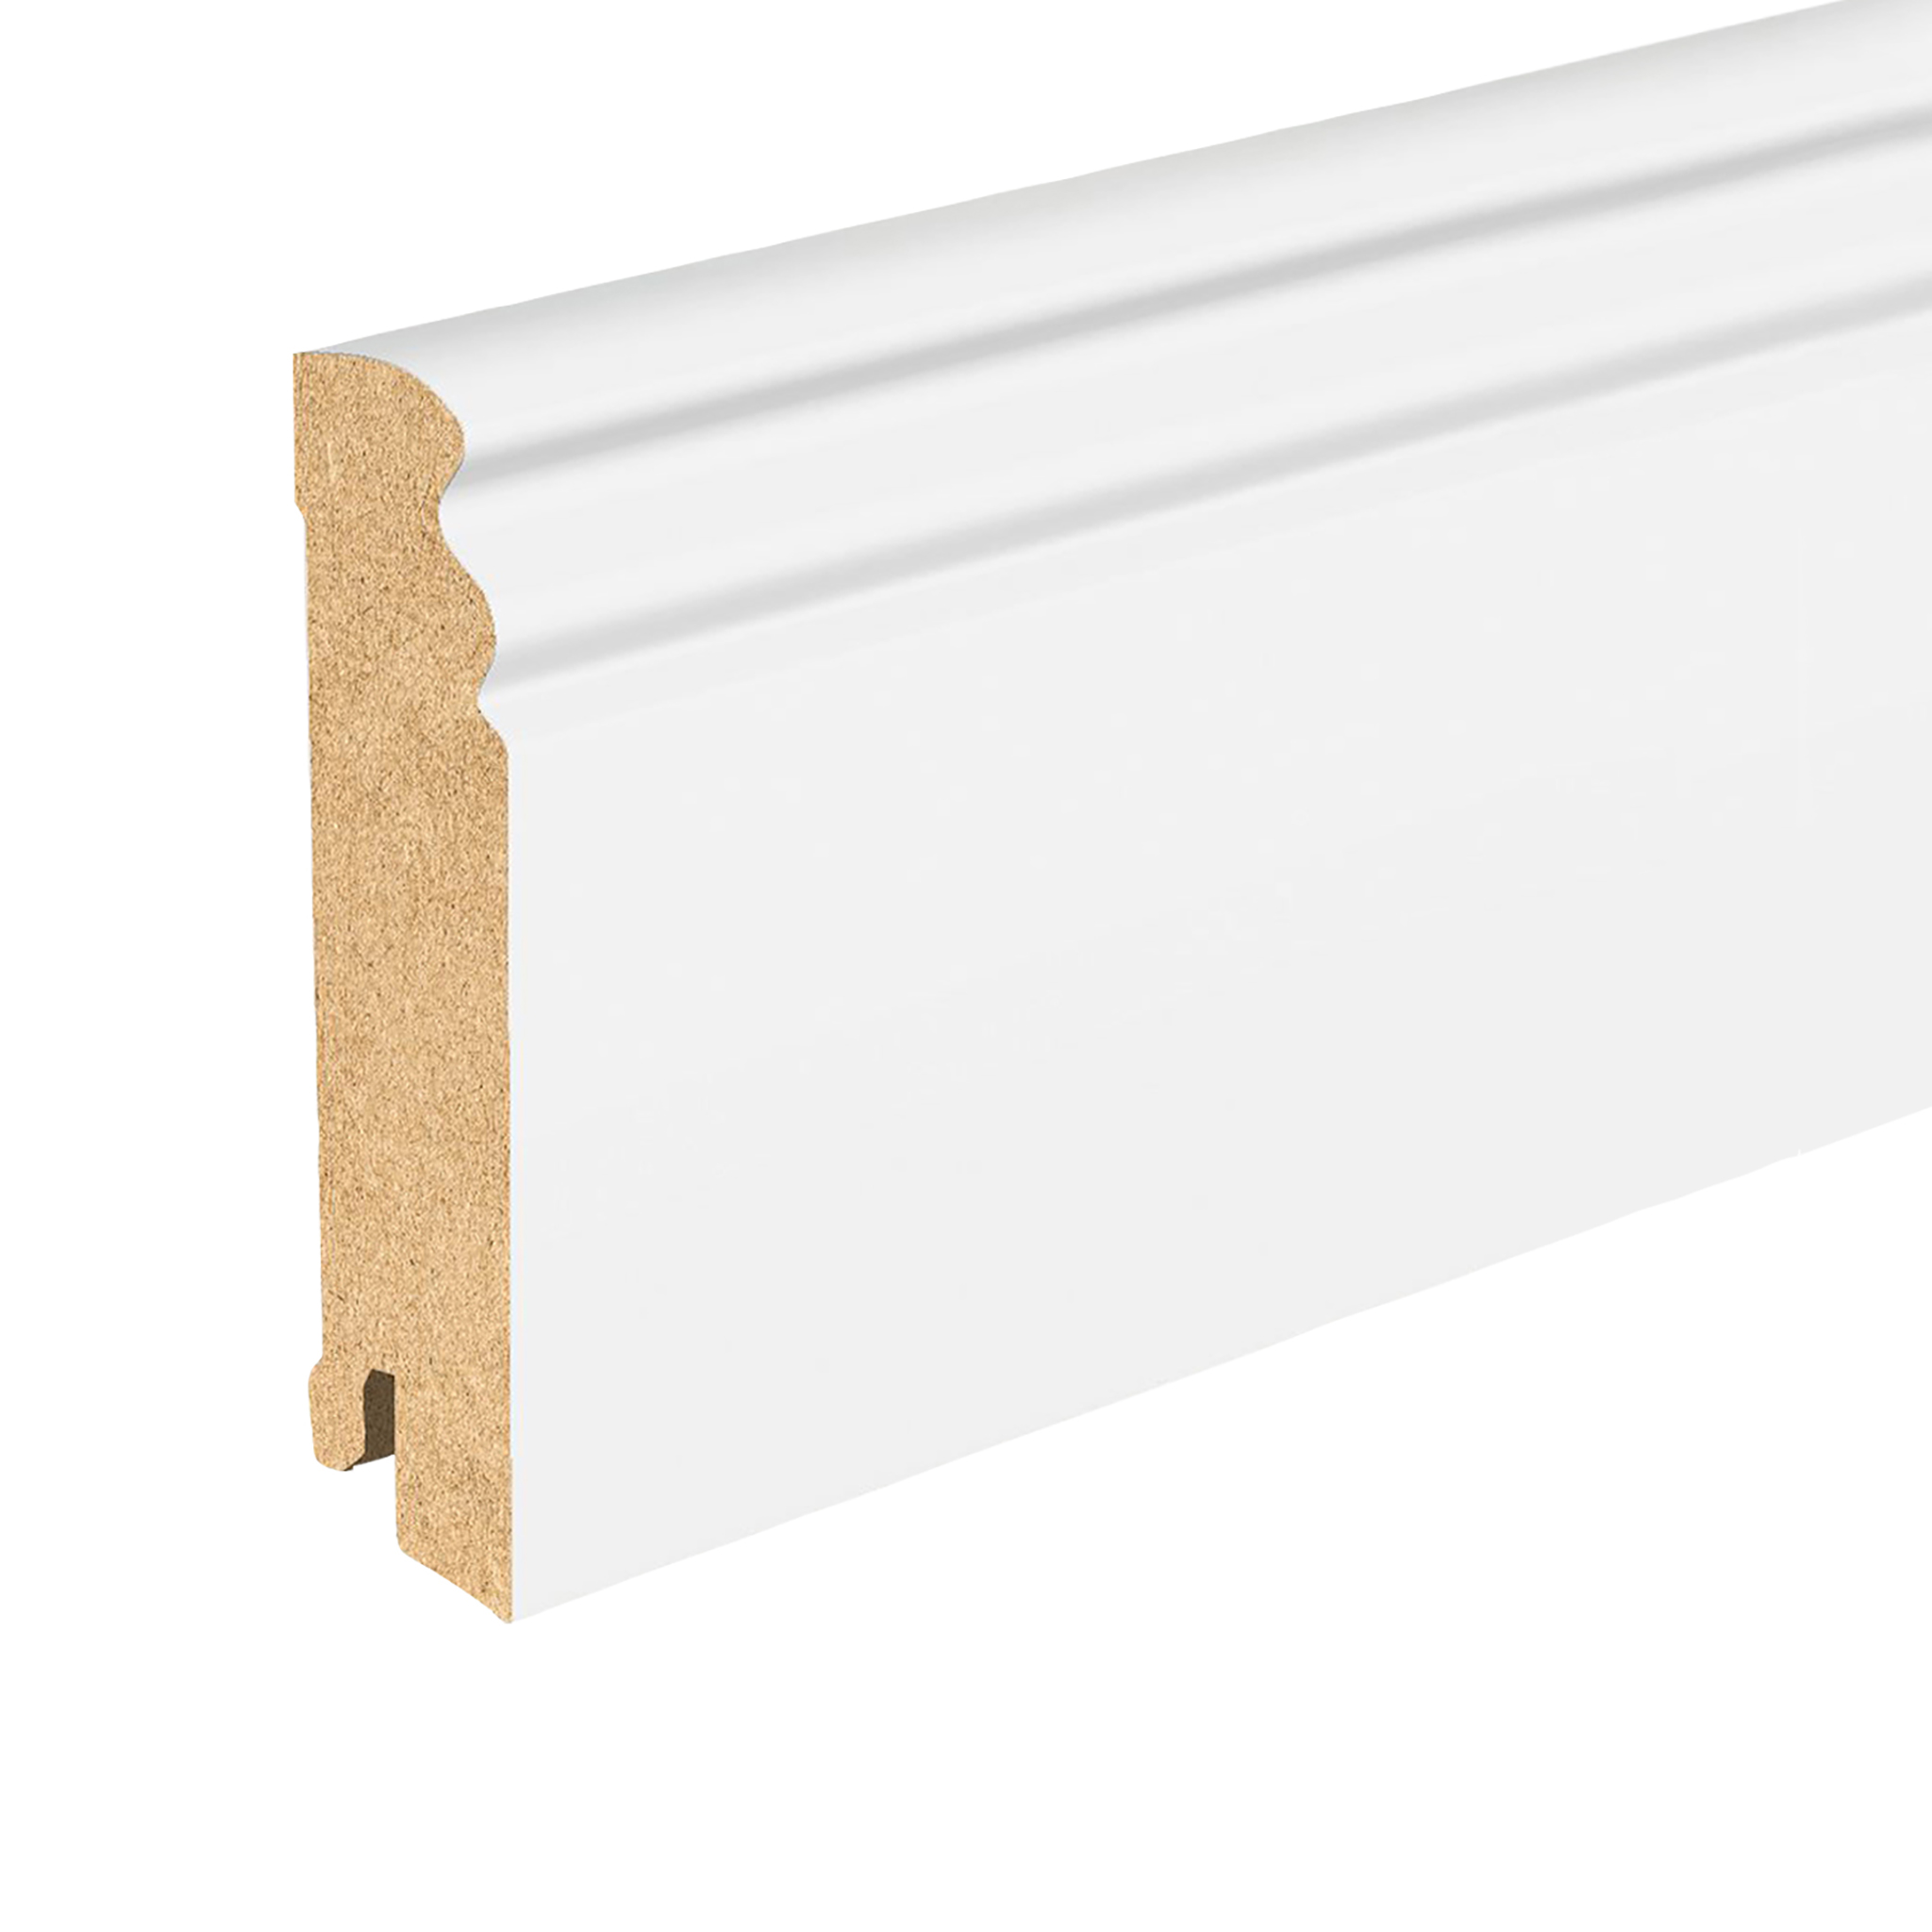 Enhance Your Walls with Skirting Board